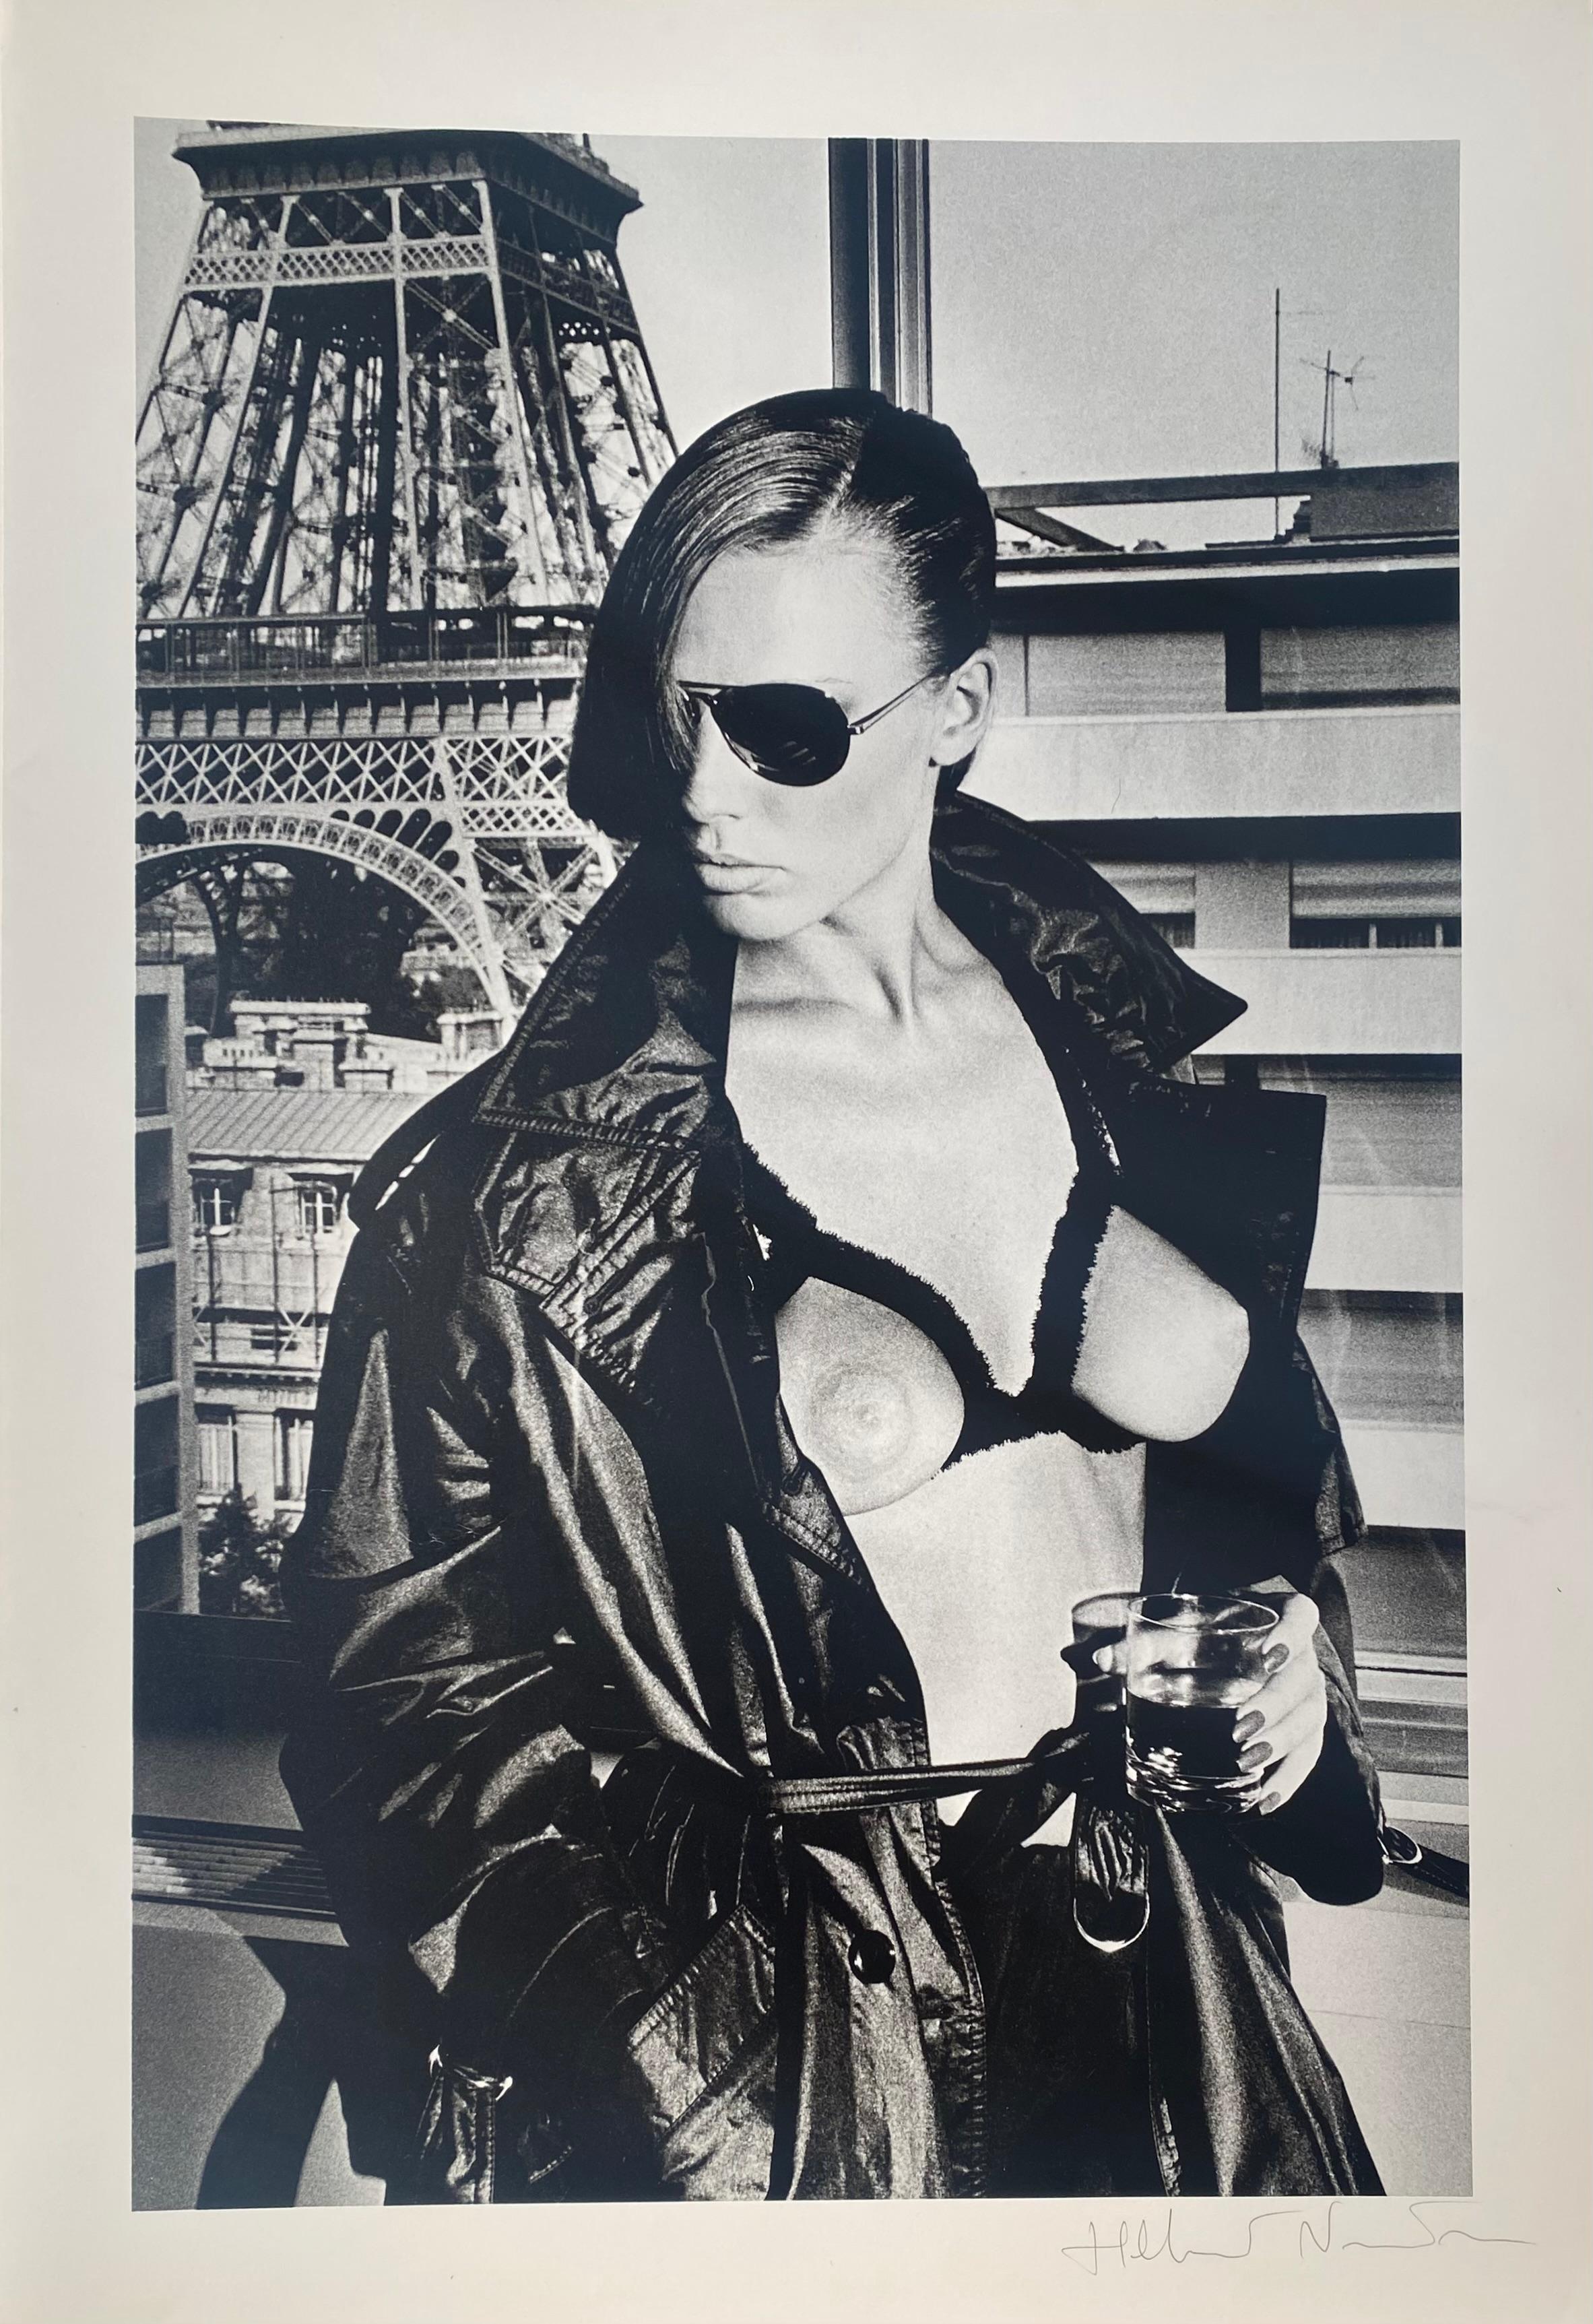 Helmut Newton - Bergström 1976
Very nice photo-lithograph by Helmut Newton
From the rare portfolio of 1980
Titled on the back
Size : 41 x 28 cm
Signed by the artist in pencil
Perfect condition 
Price : 890€ for the book.